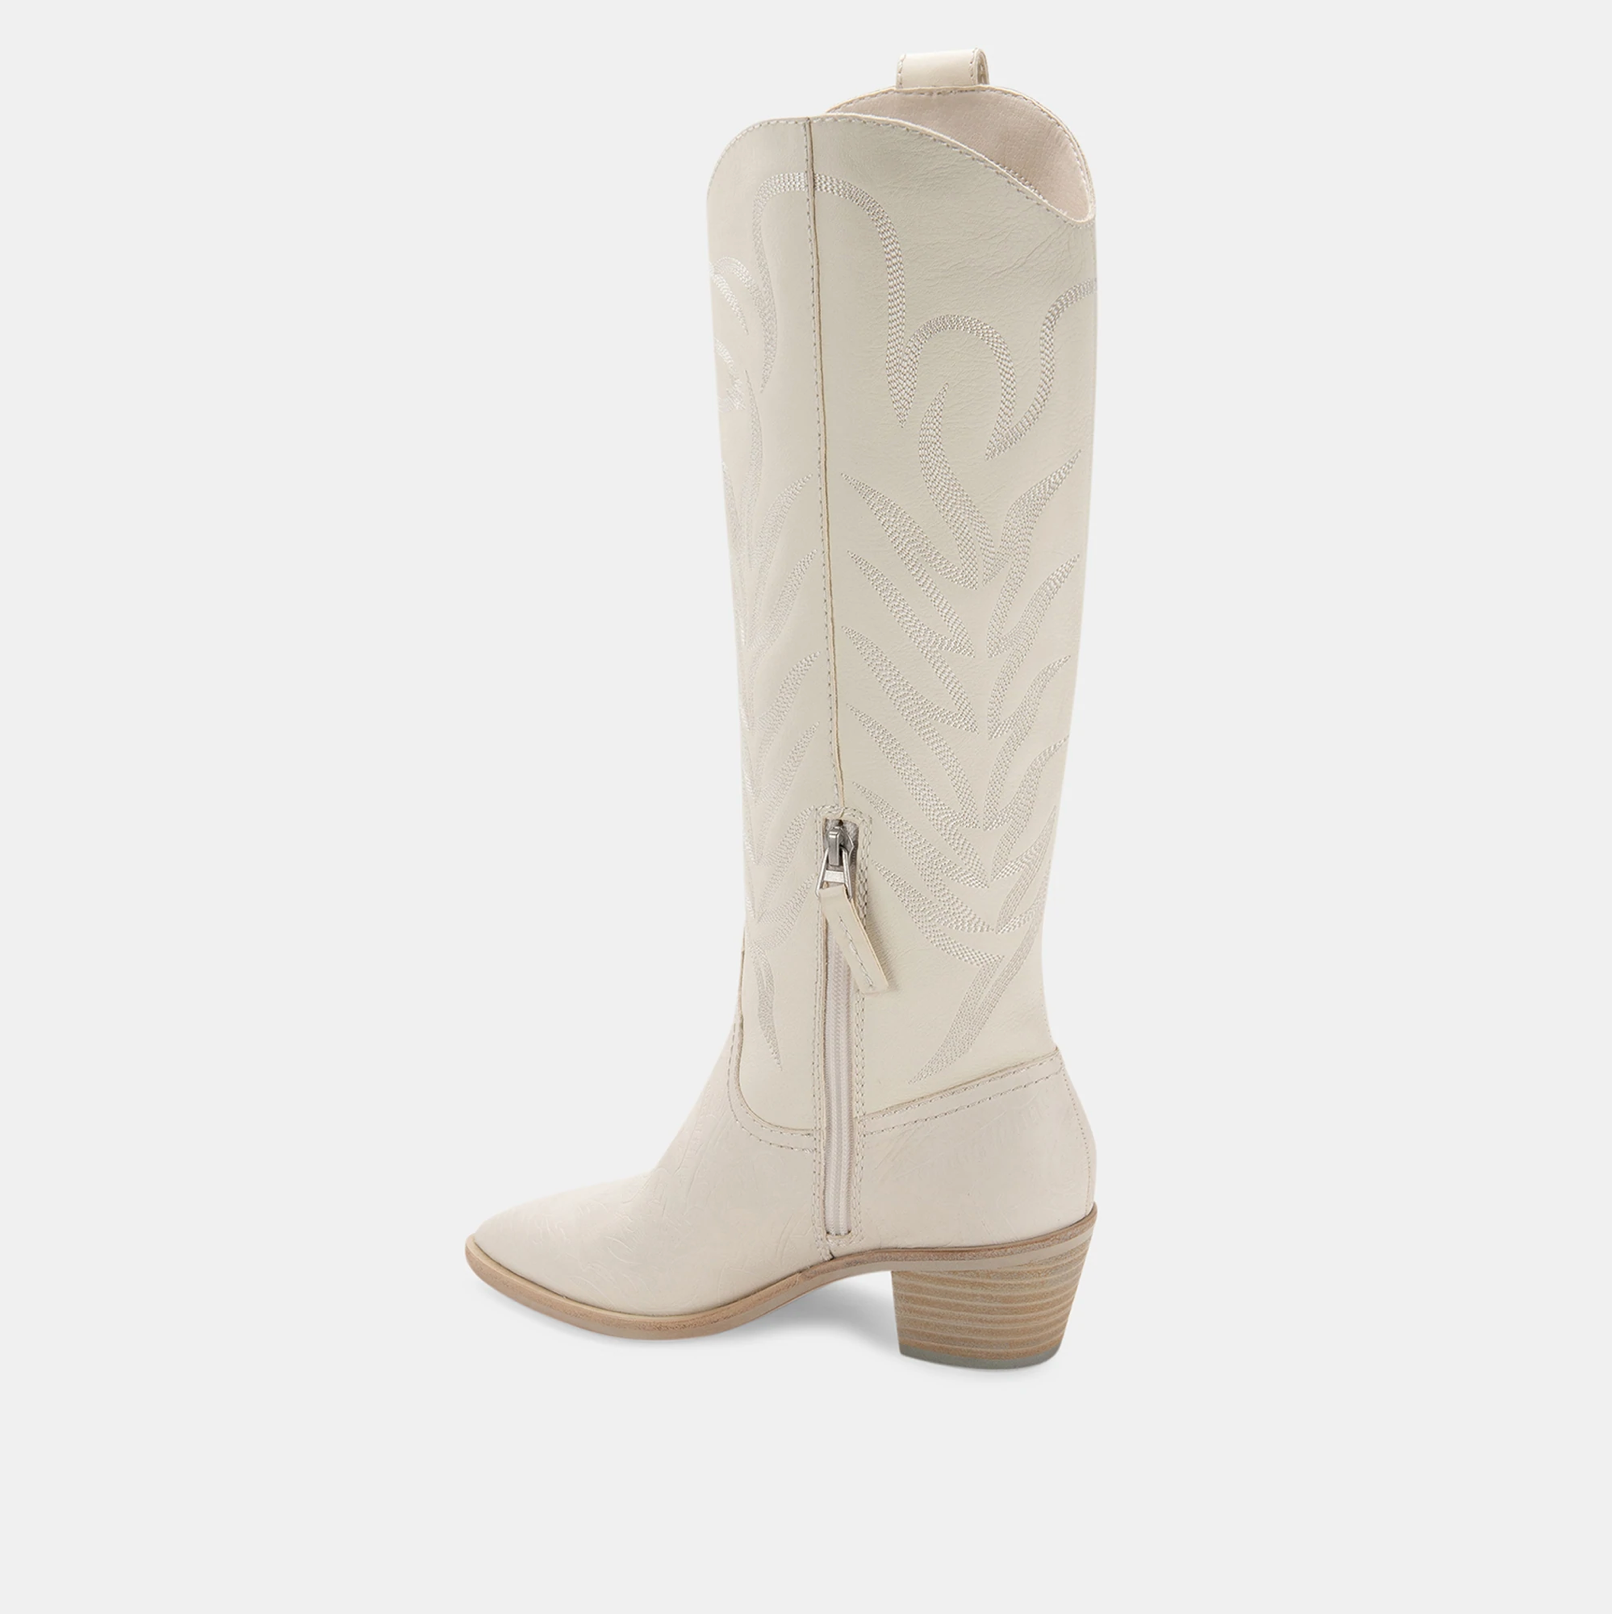 Shop Dolce Vita Boots: Stylish & Comfortable Footwear | Addie Rose Boutique